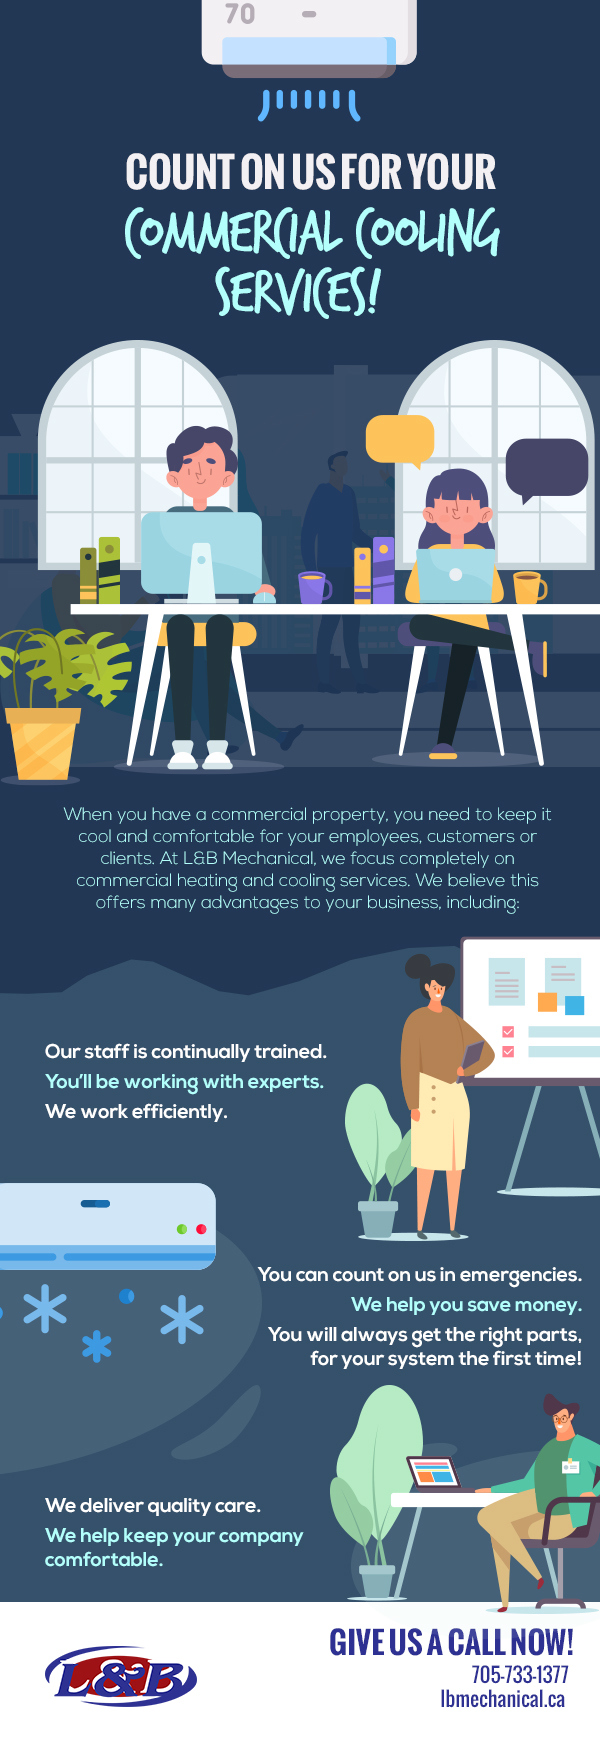 Count on Us for Your Commercial Cooling Services! [infographic]